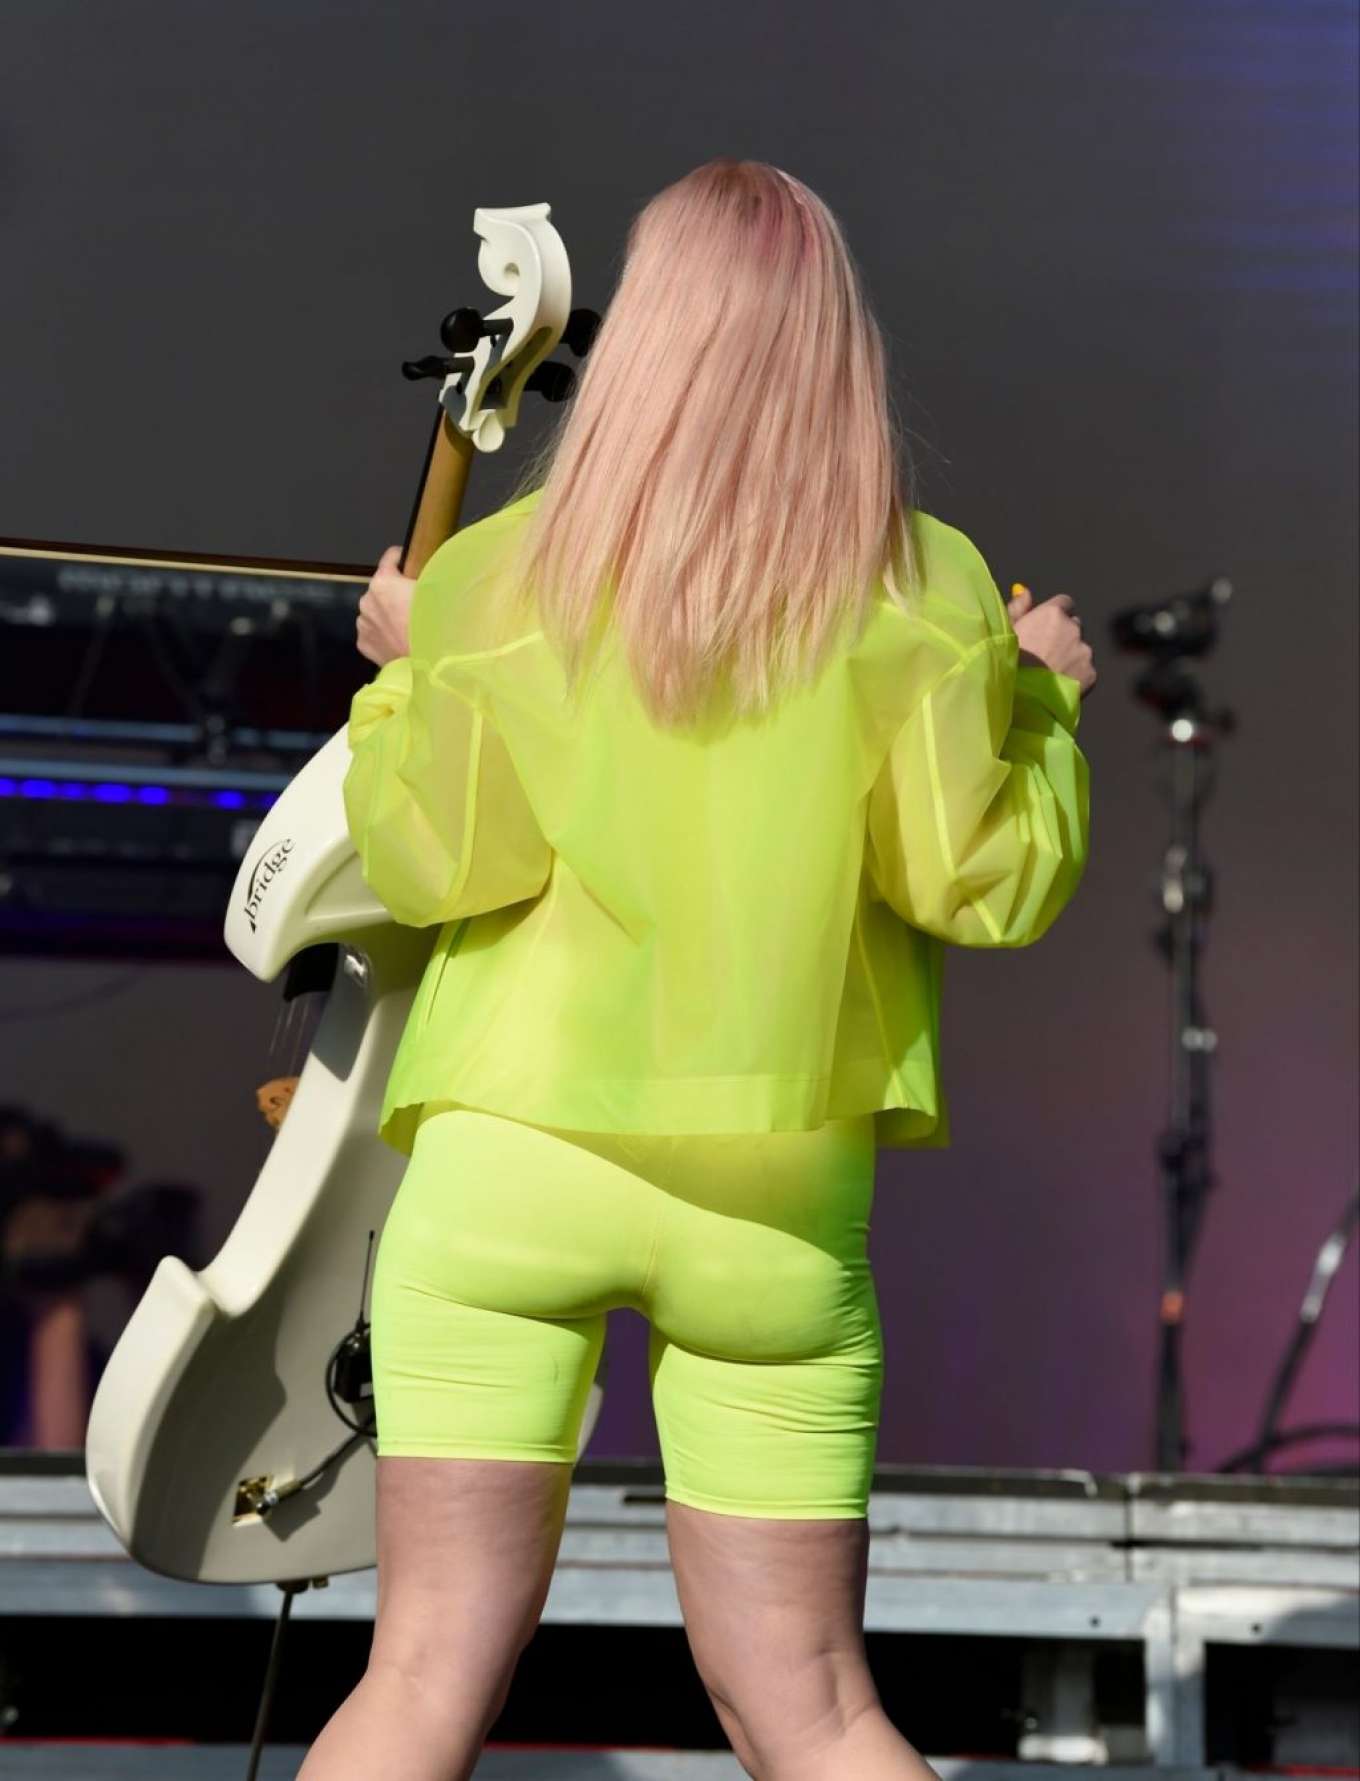 Grace Chatto 2019 : Grace Chatto (Clean Bandit) - Performing live at the Fu...